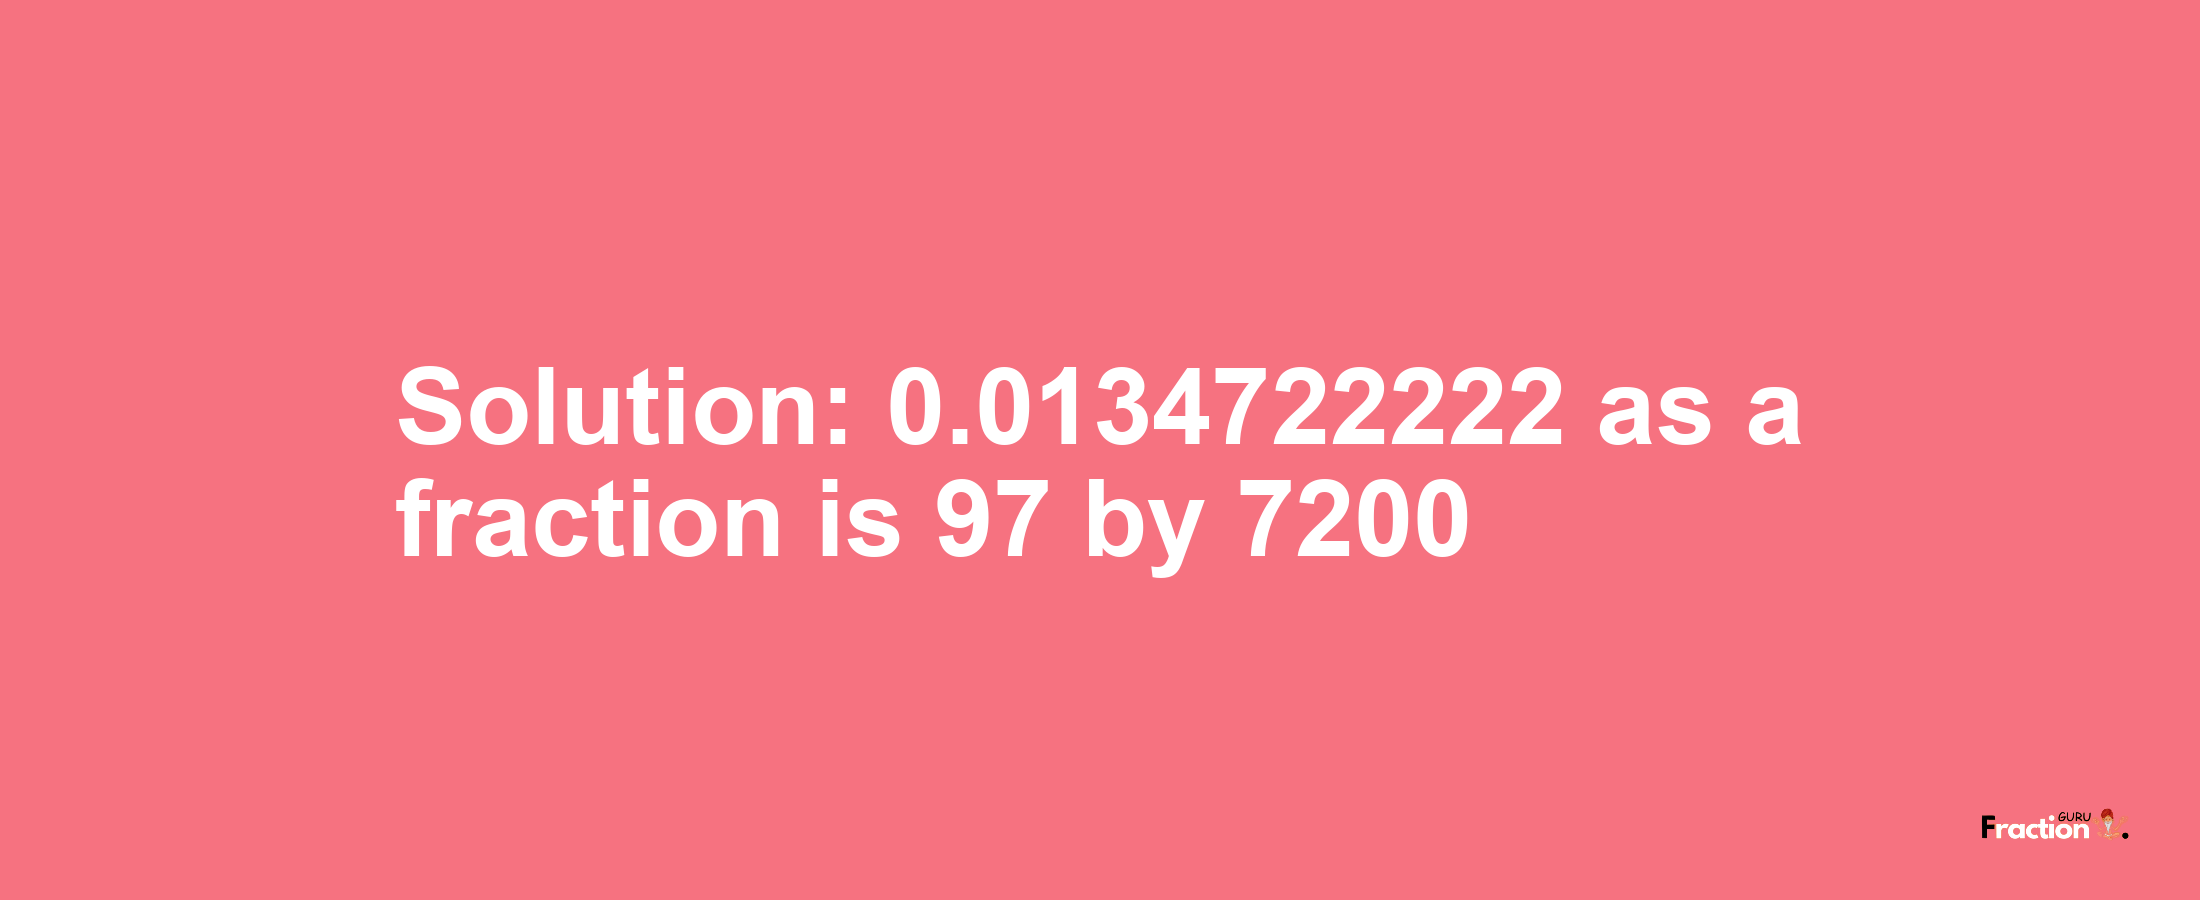 Solution:0.0134722222 as a fraction is 97/7200